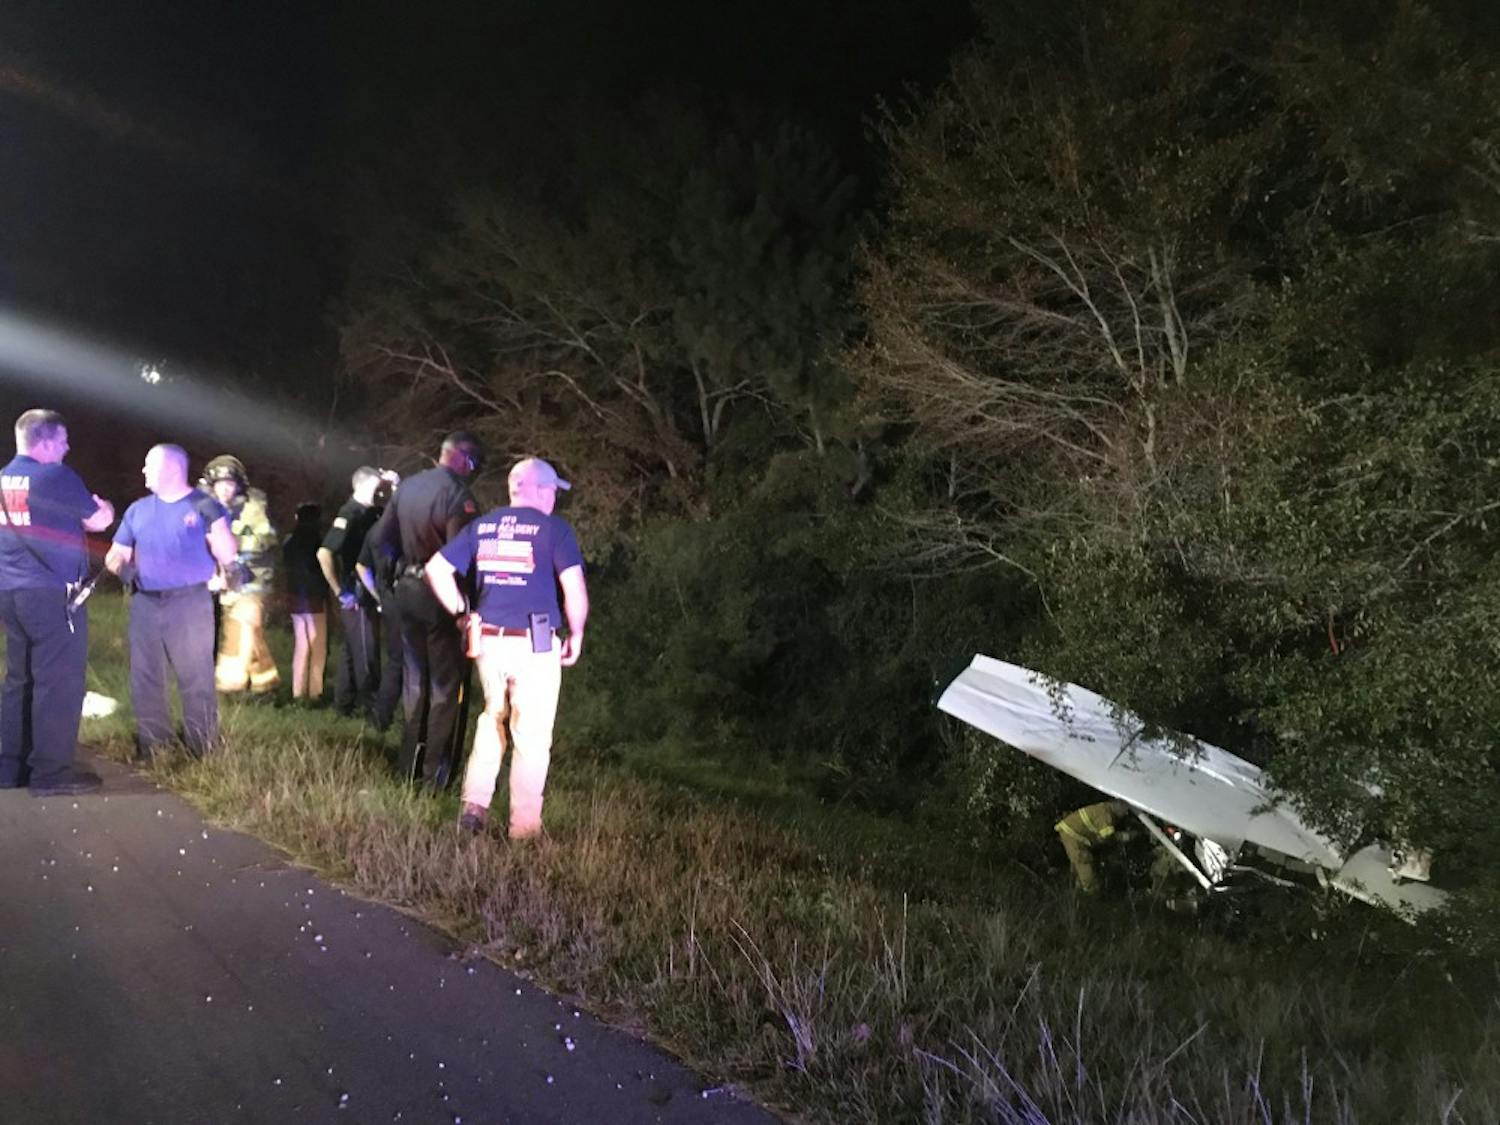 First responders on the site of a plane crash off of I-85 on Oct. 16, 2018.